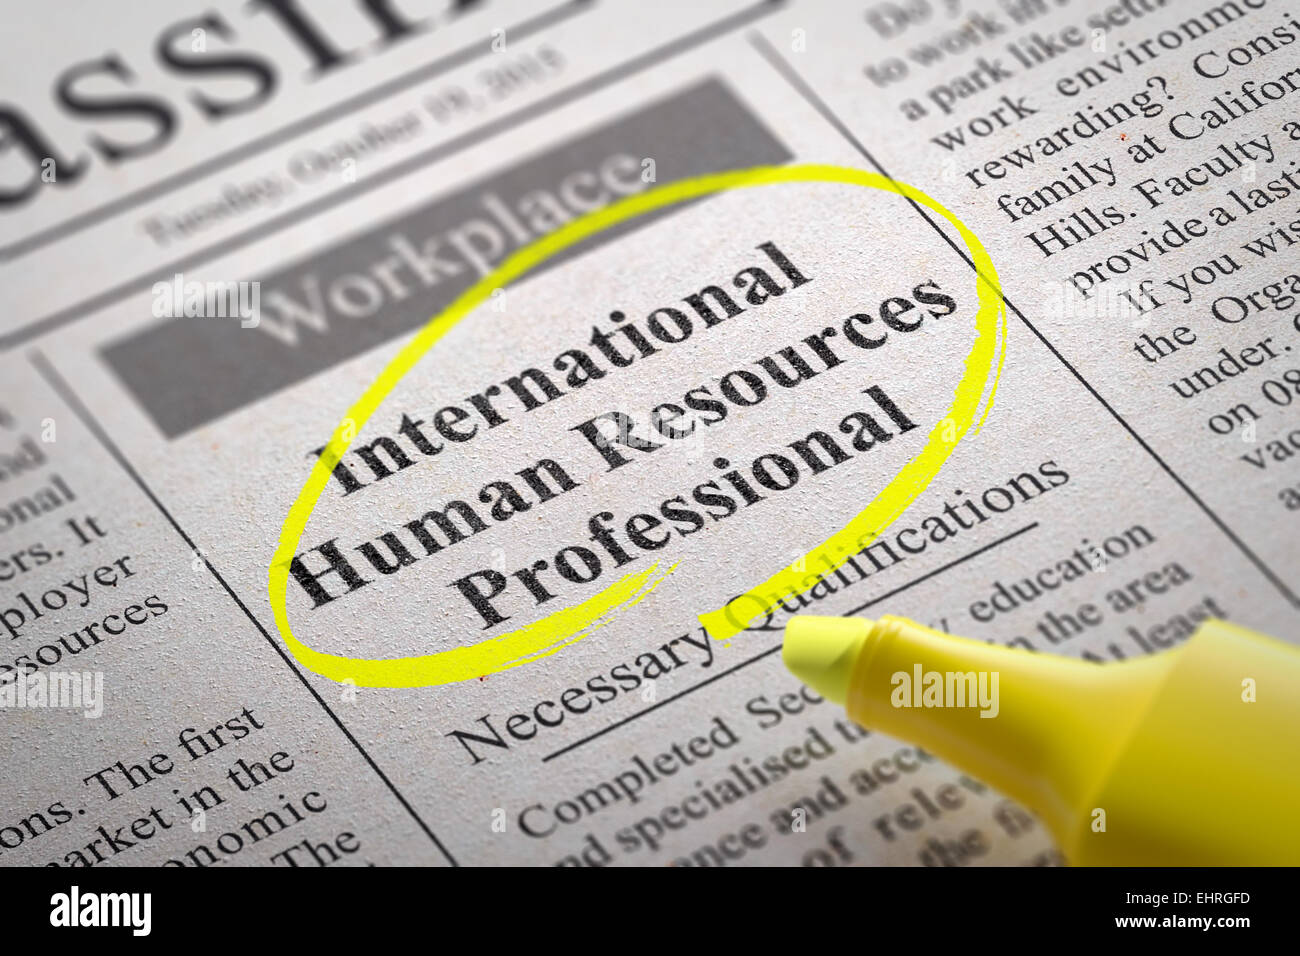 International Human Resources Professional Vacancy in Newspaper. Stock Photo